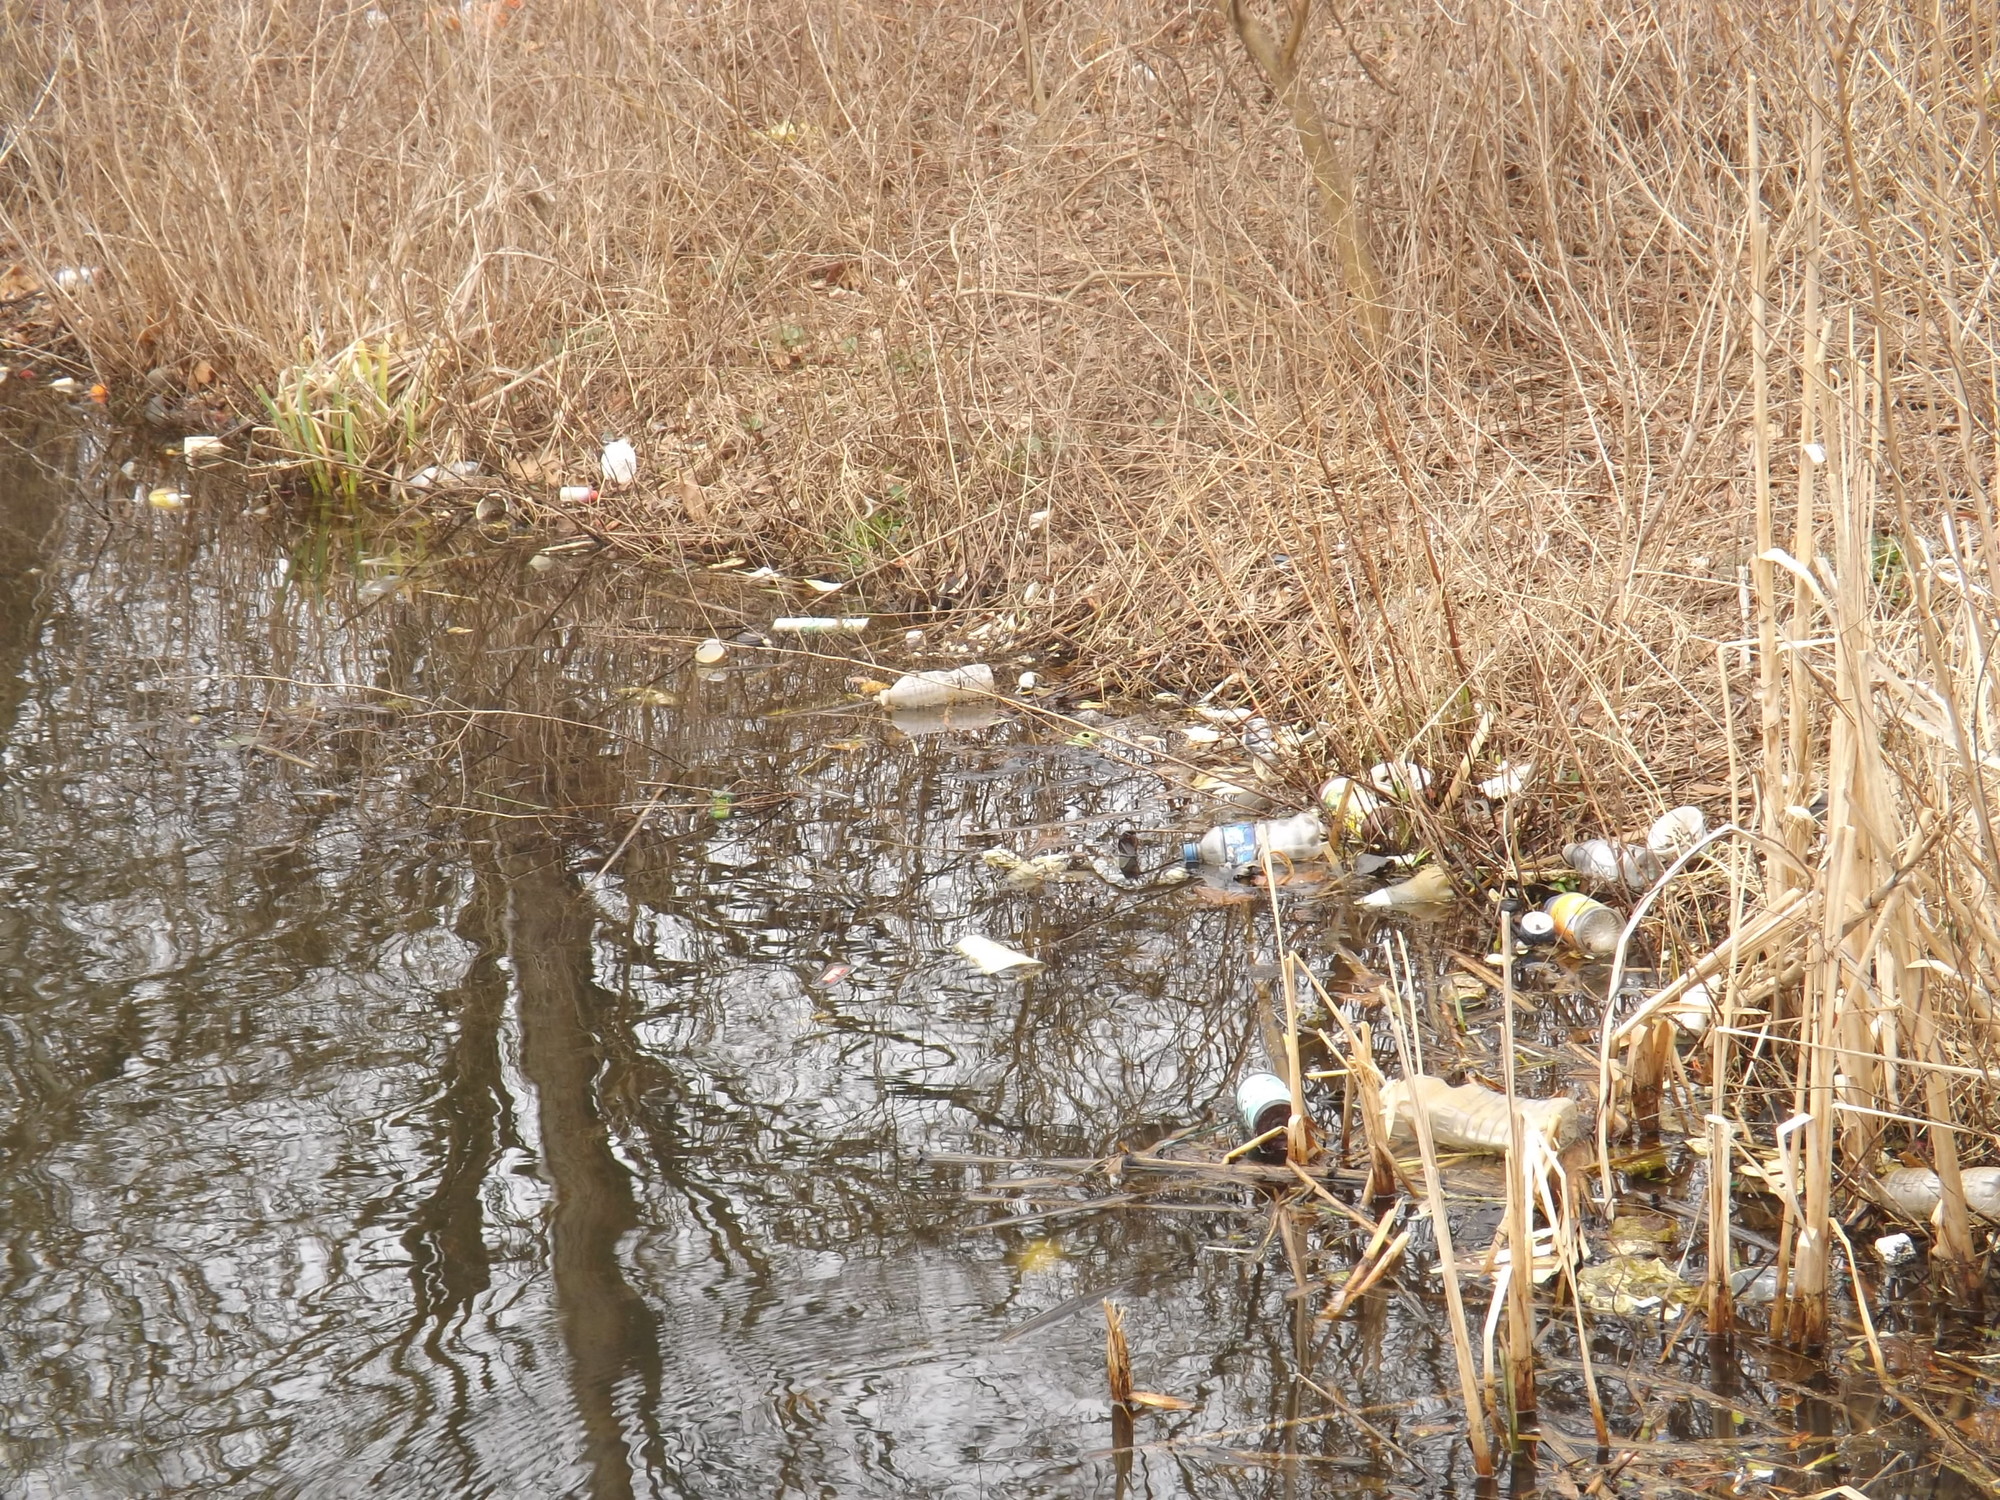 Lofts Pond Park has plenty of litter to be picked up this Saturday.